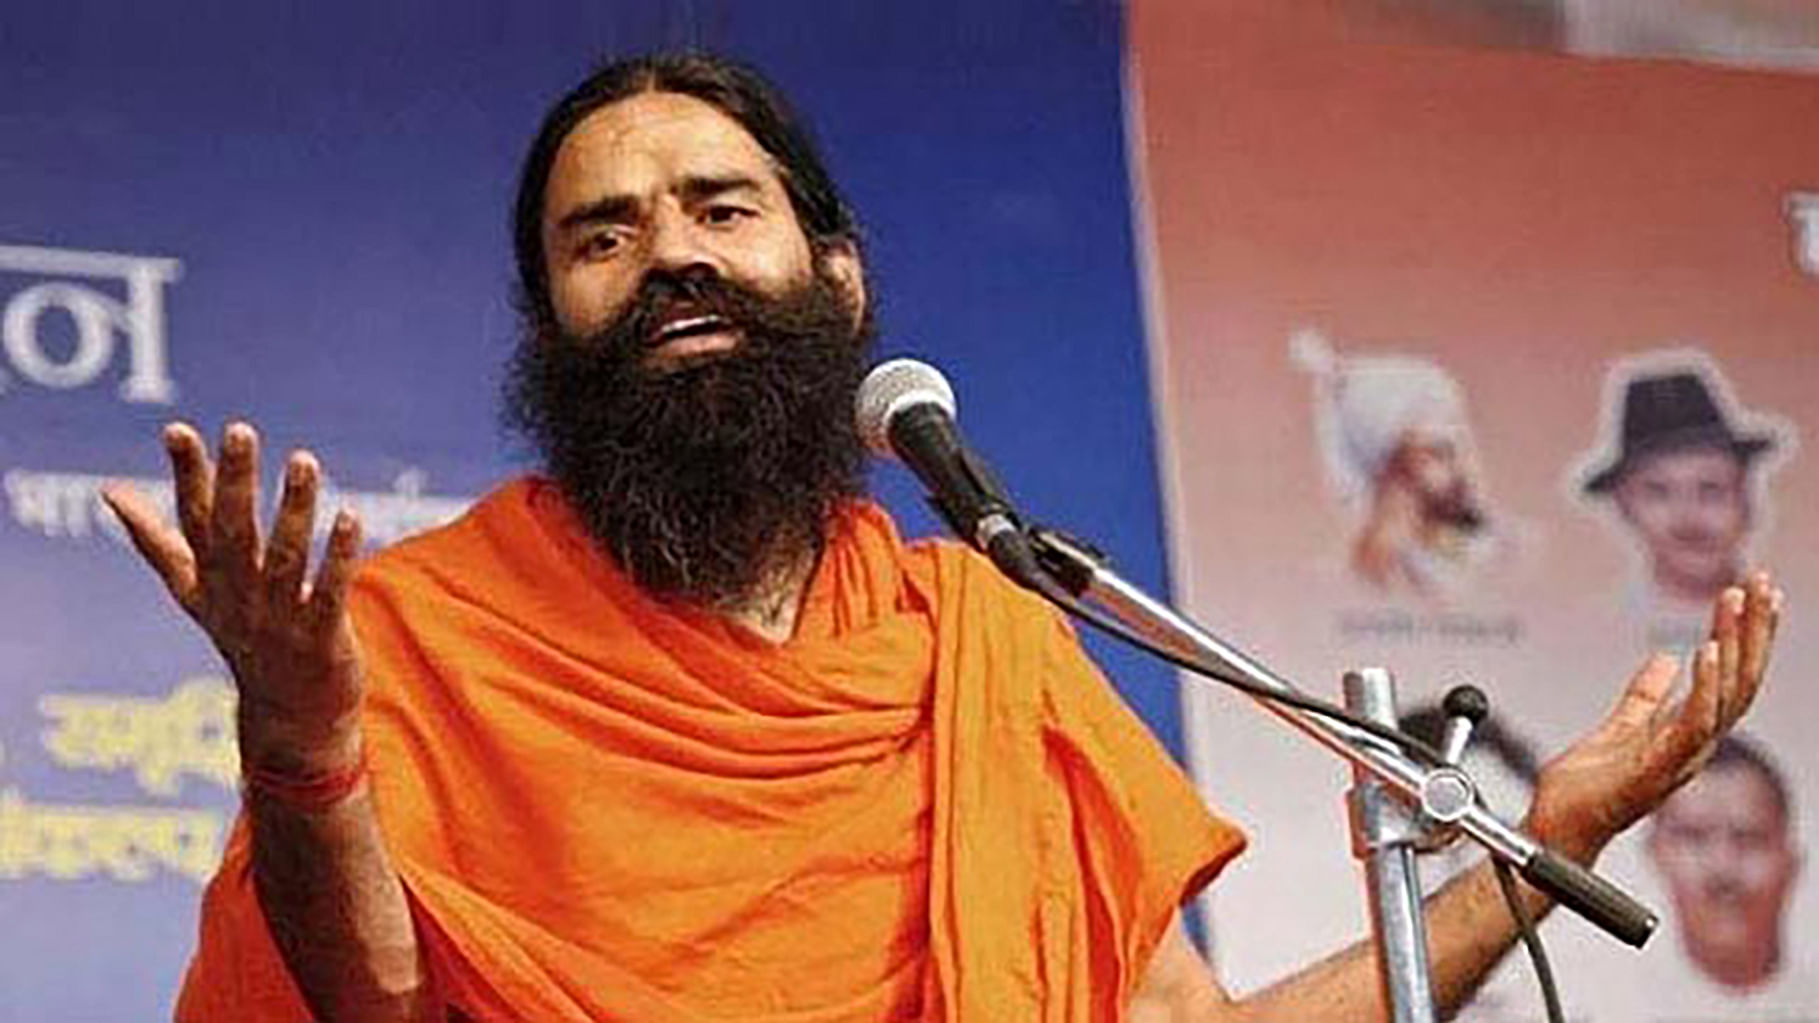 The Maharashtra government on Tuesday, 23 February, said it will not allow the sale of Coronil, an “anti-COVID” medicine manufactured by Baba Ramdev’s Patanjali Ayurveda. Image used for representation.&nbsp;